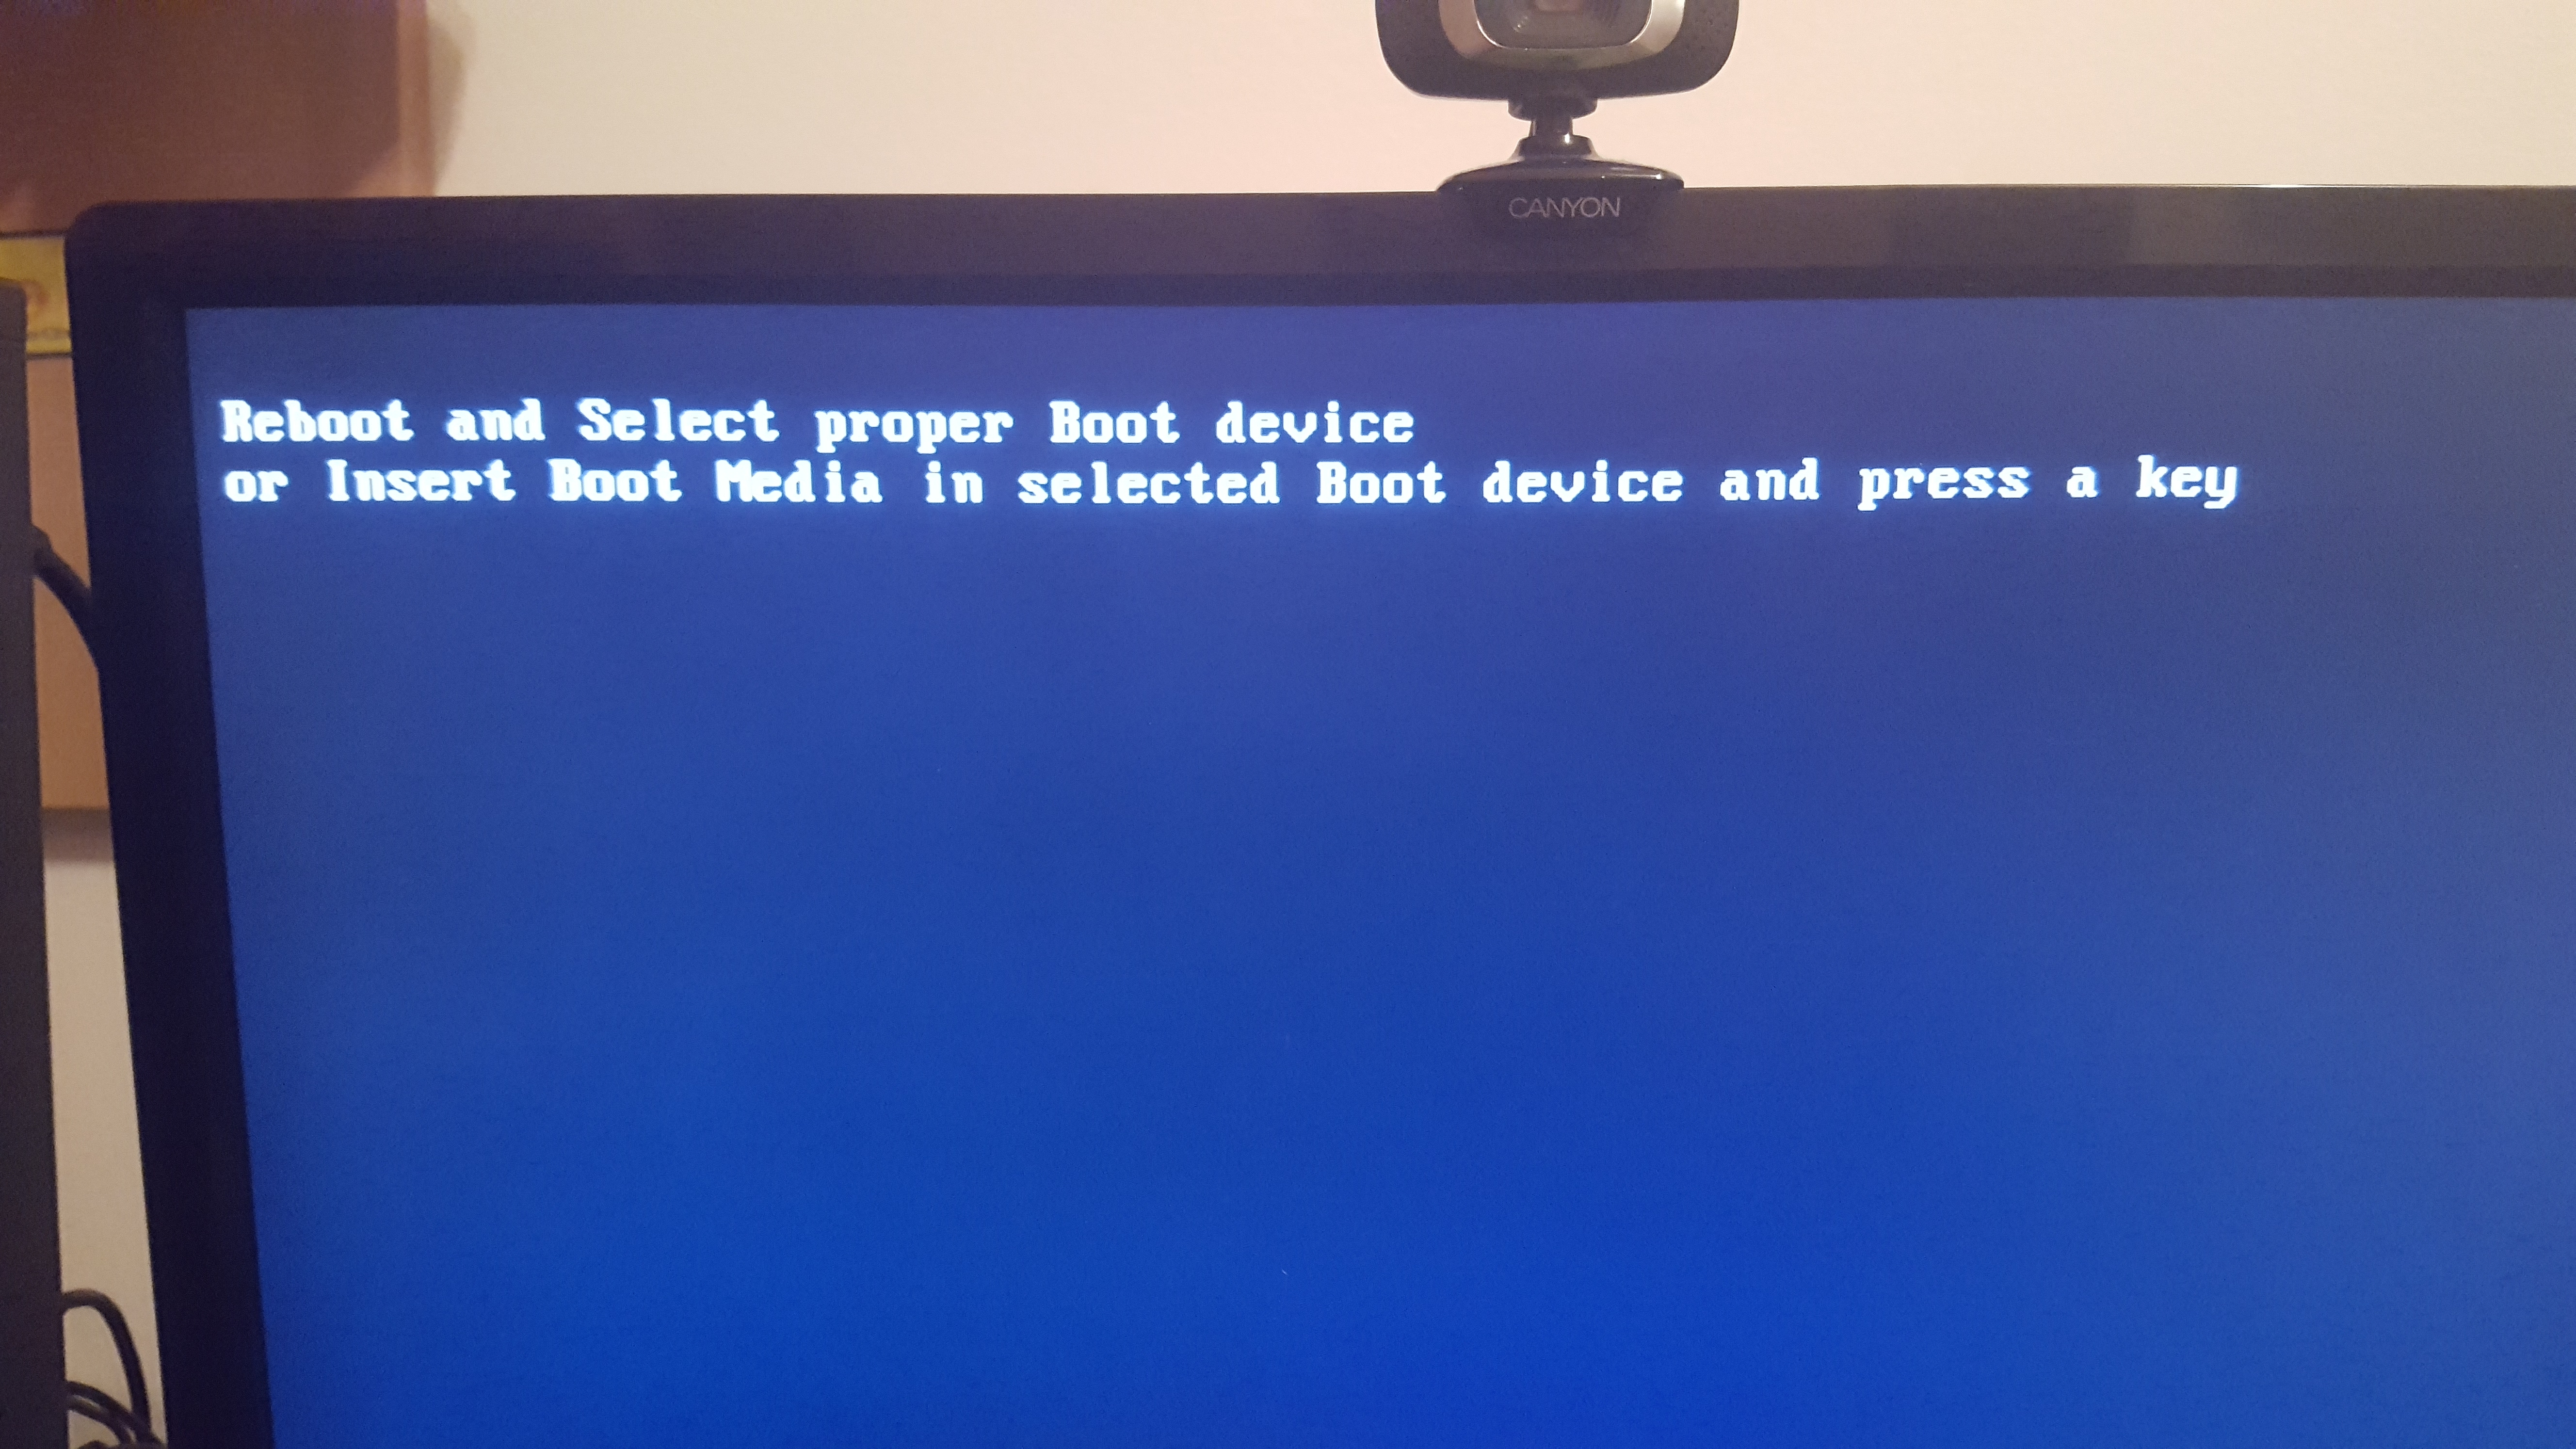 Reboot And Select Proper Boot Device Cpus Motherboards And